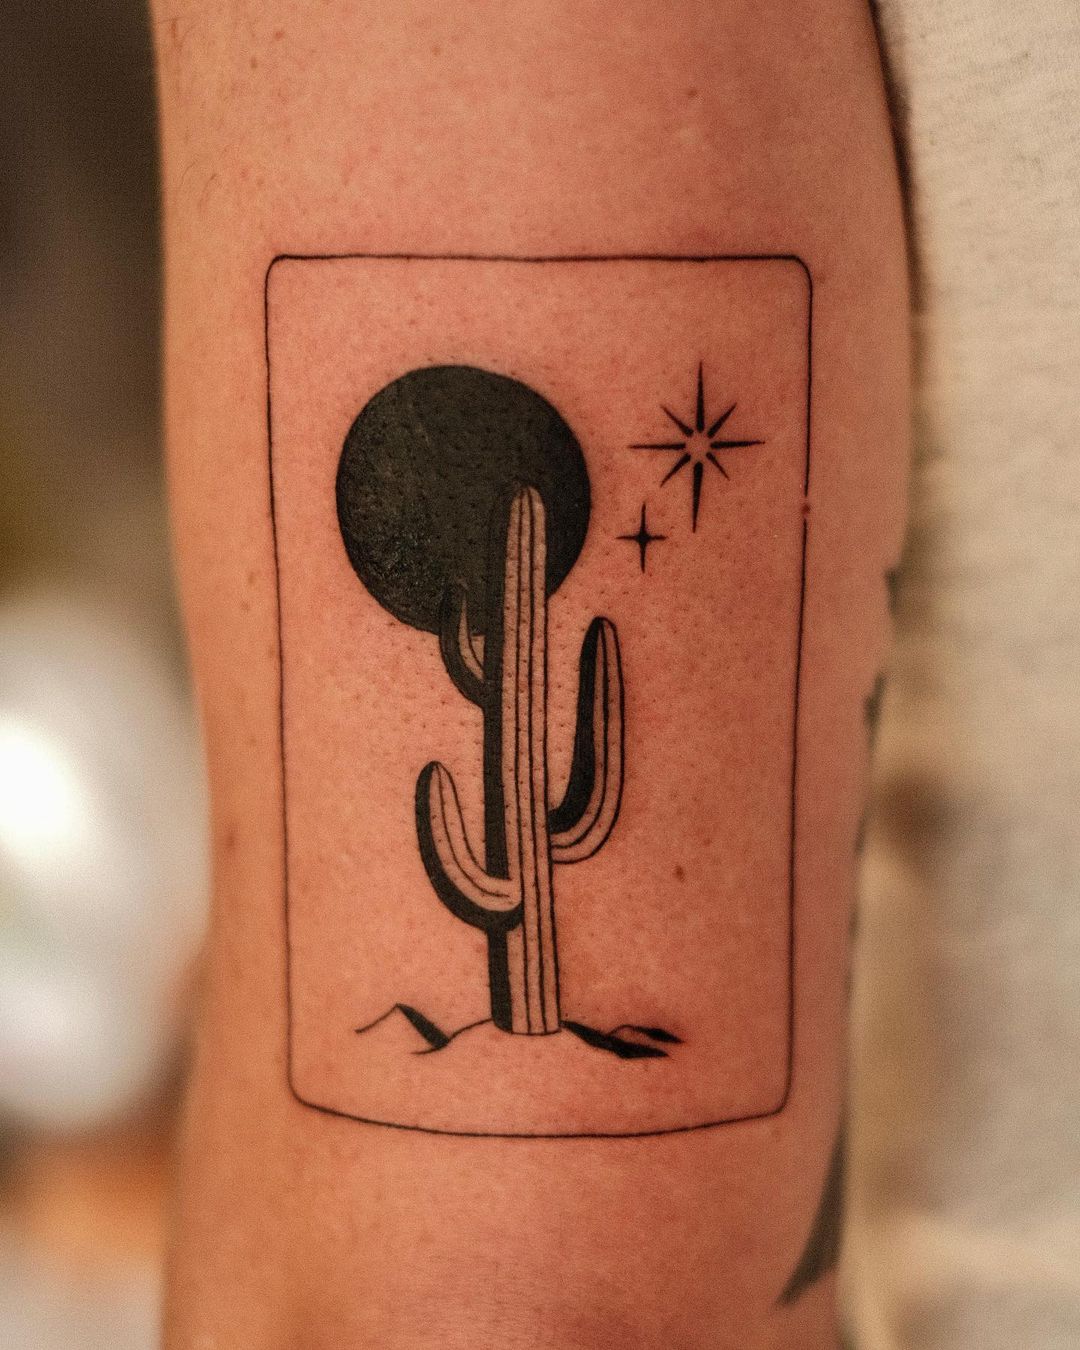 Maybe without the alien | Alien tattoo, Believe tattoos, Tattoo designs